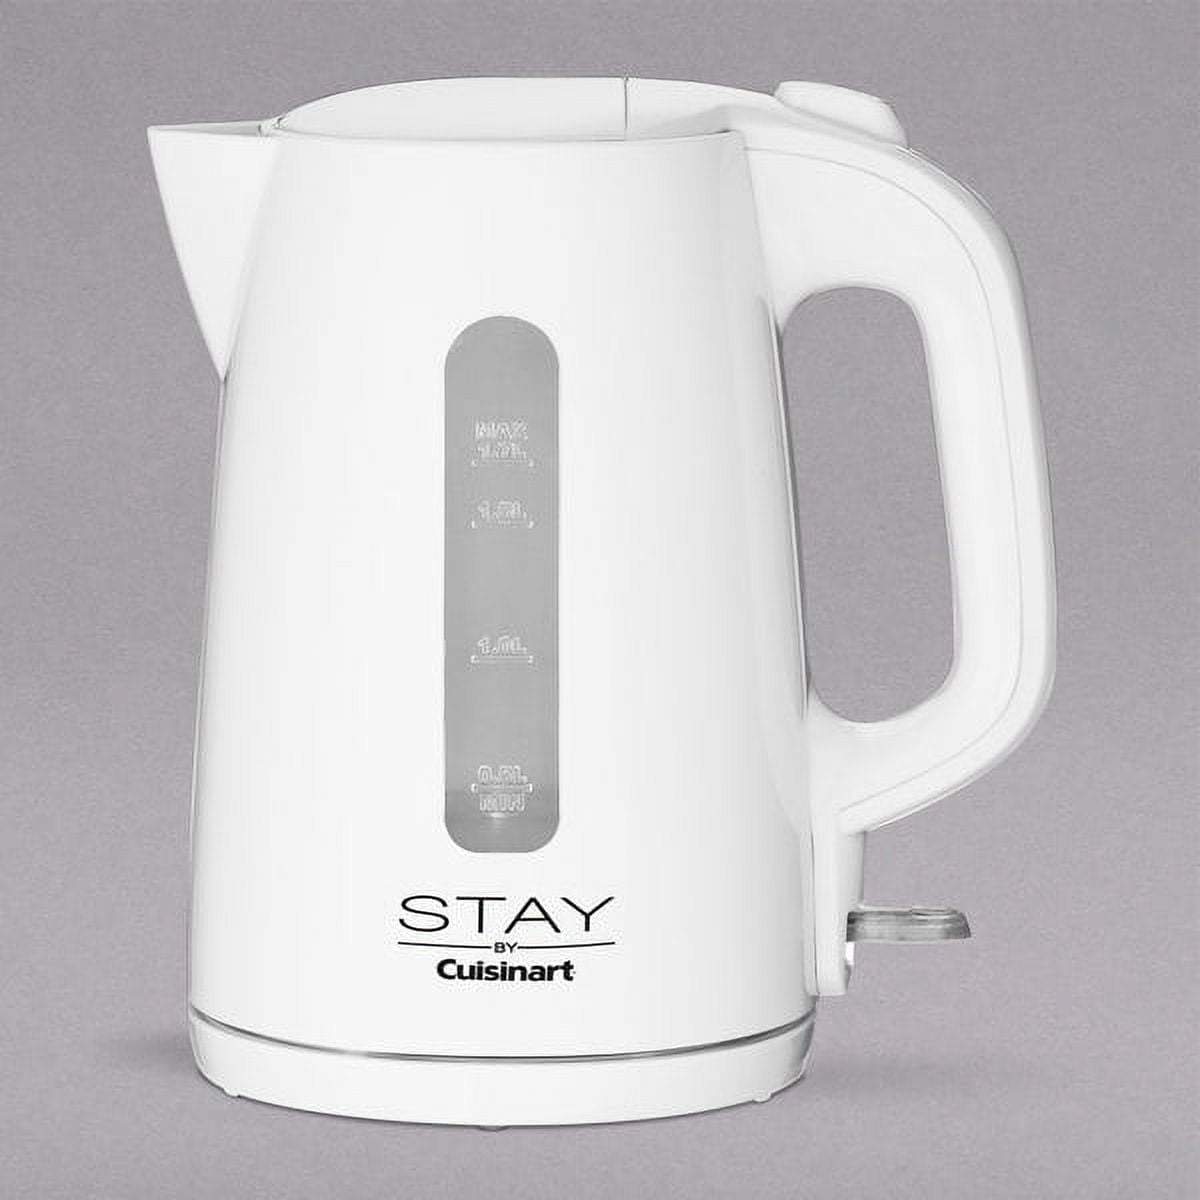 STAY by Cuisinart® Cordless Electric Kettle, Black